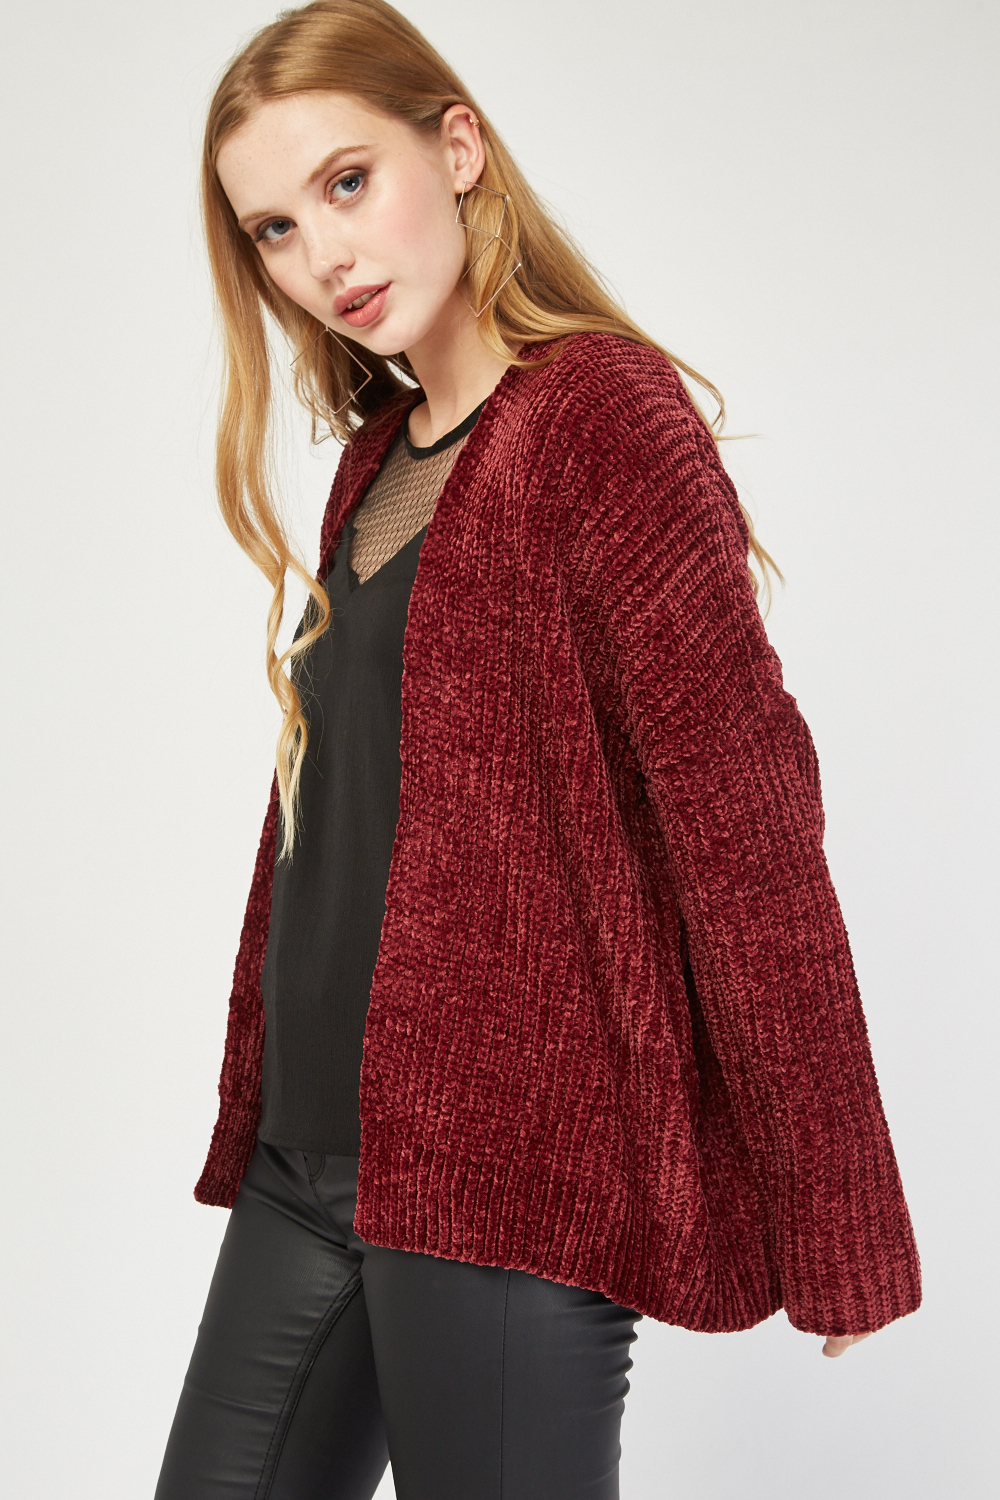 Chenille Knit Open Front Cardigan - Just $6